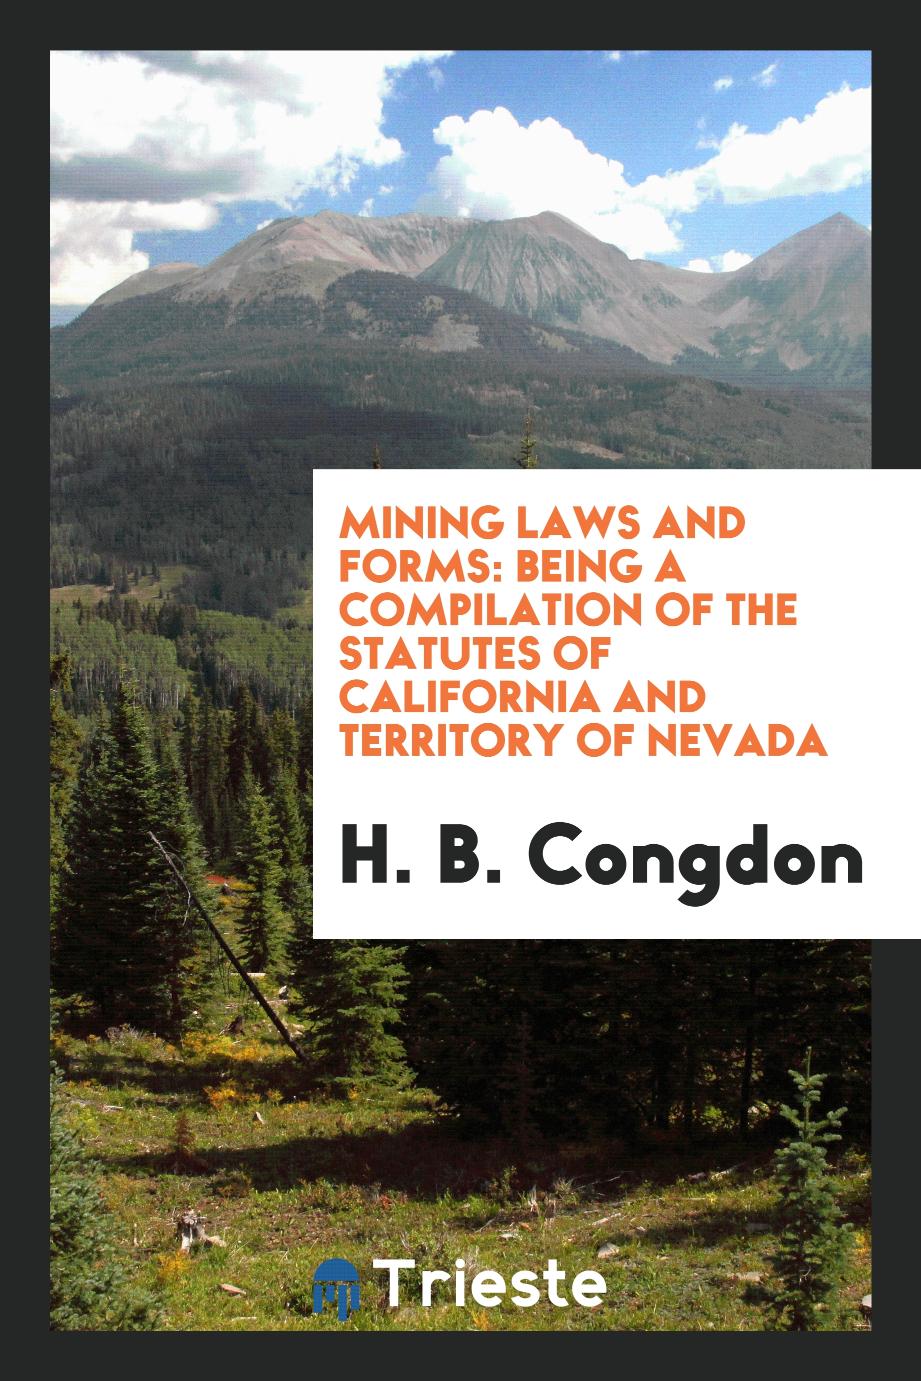 Mining laws and forms: being a compilation of the statutes of California and territory of Nevada